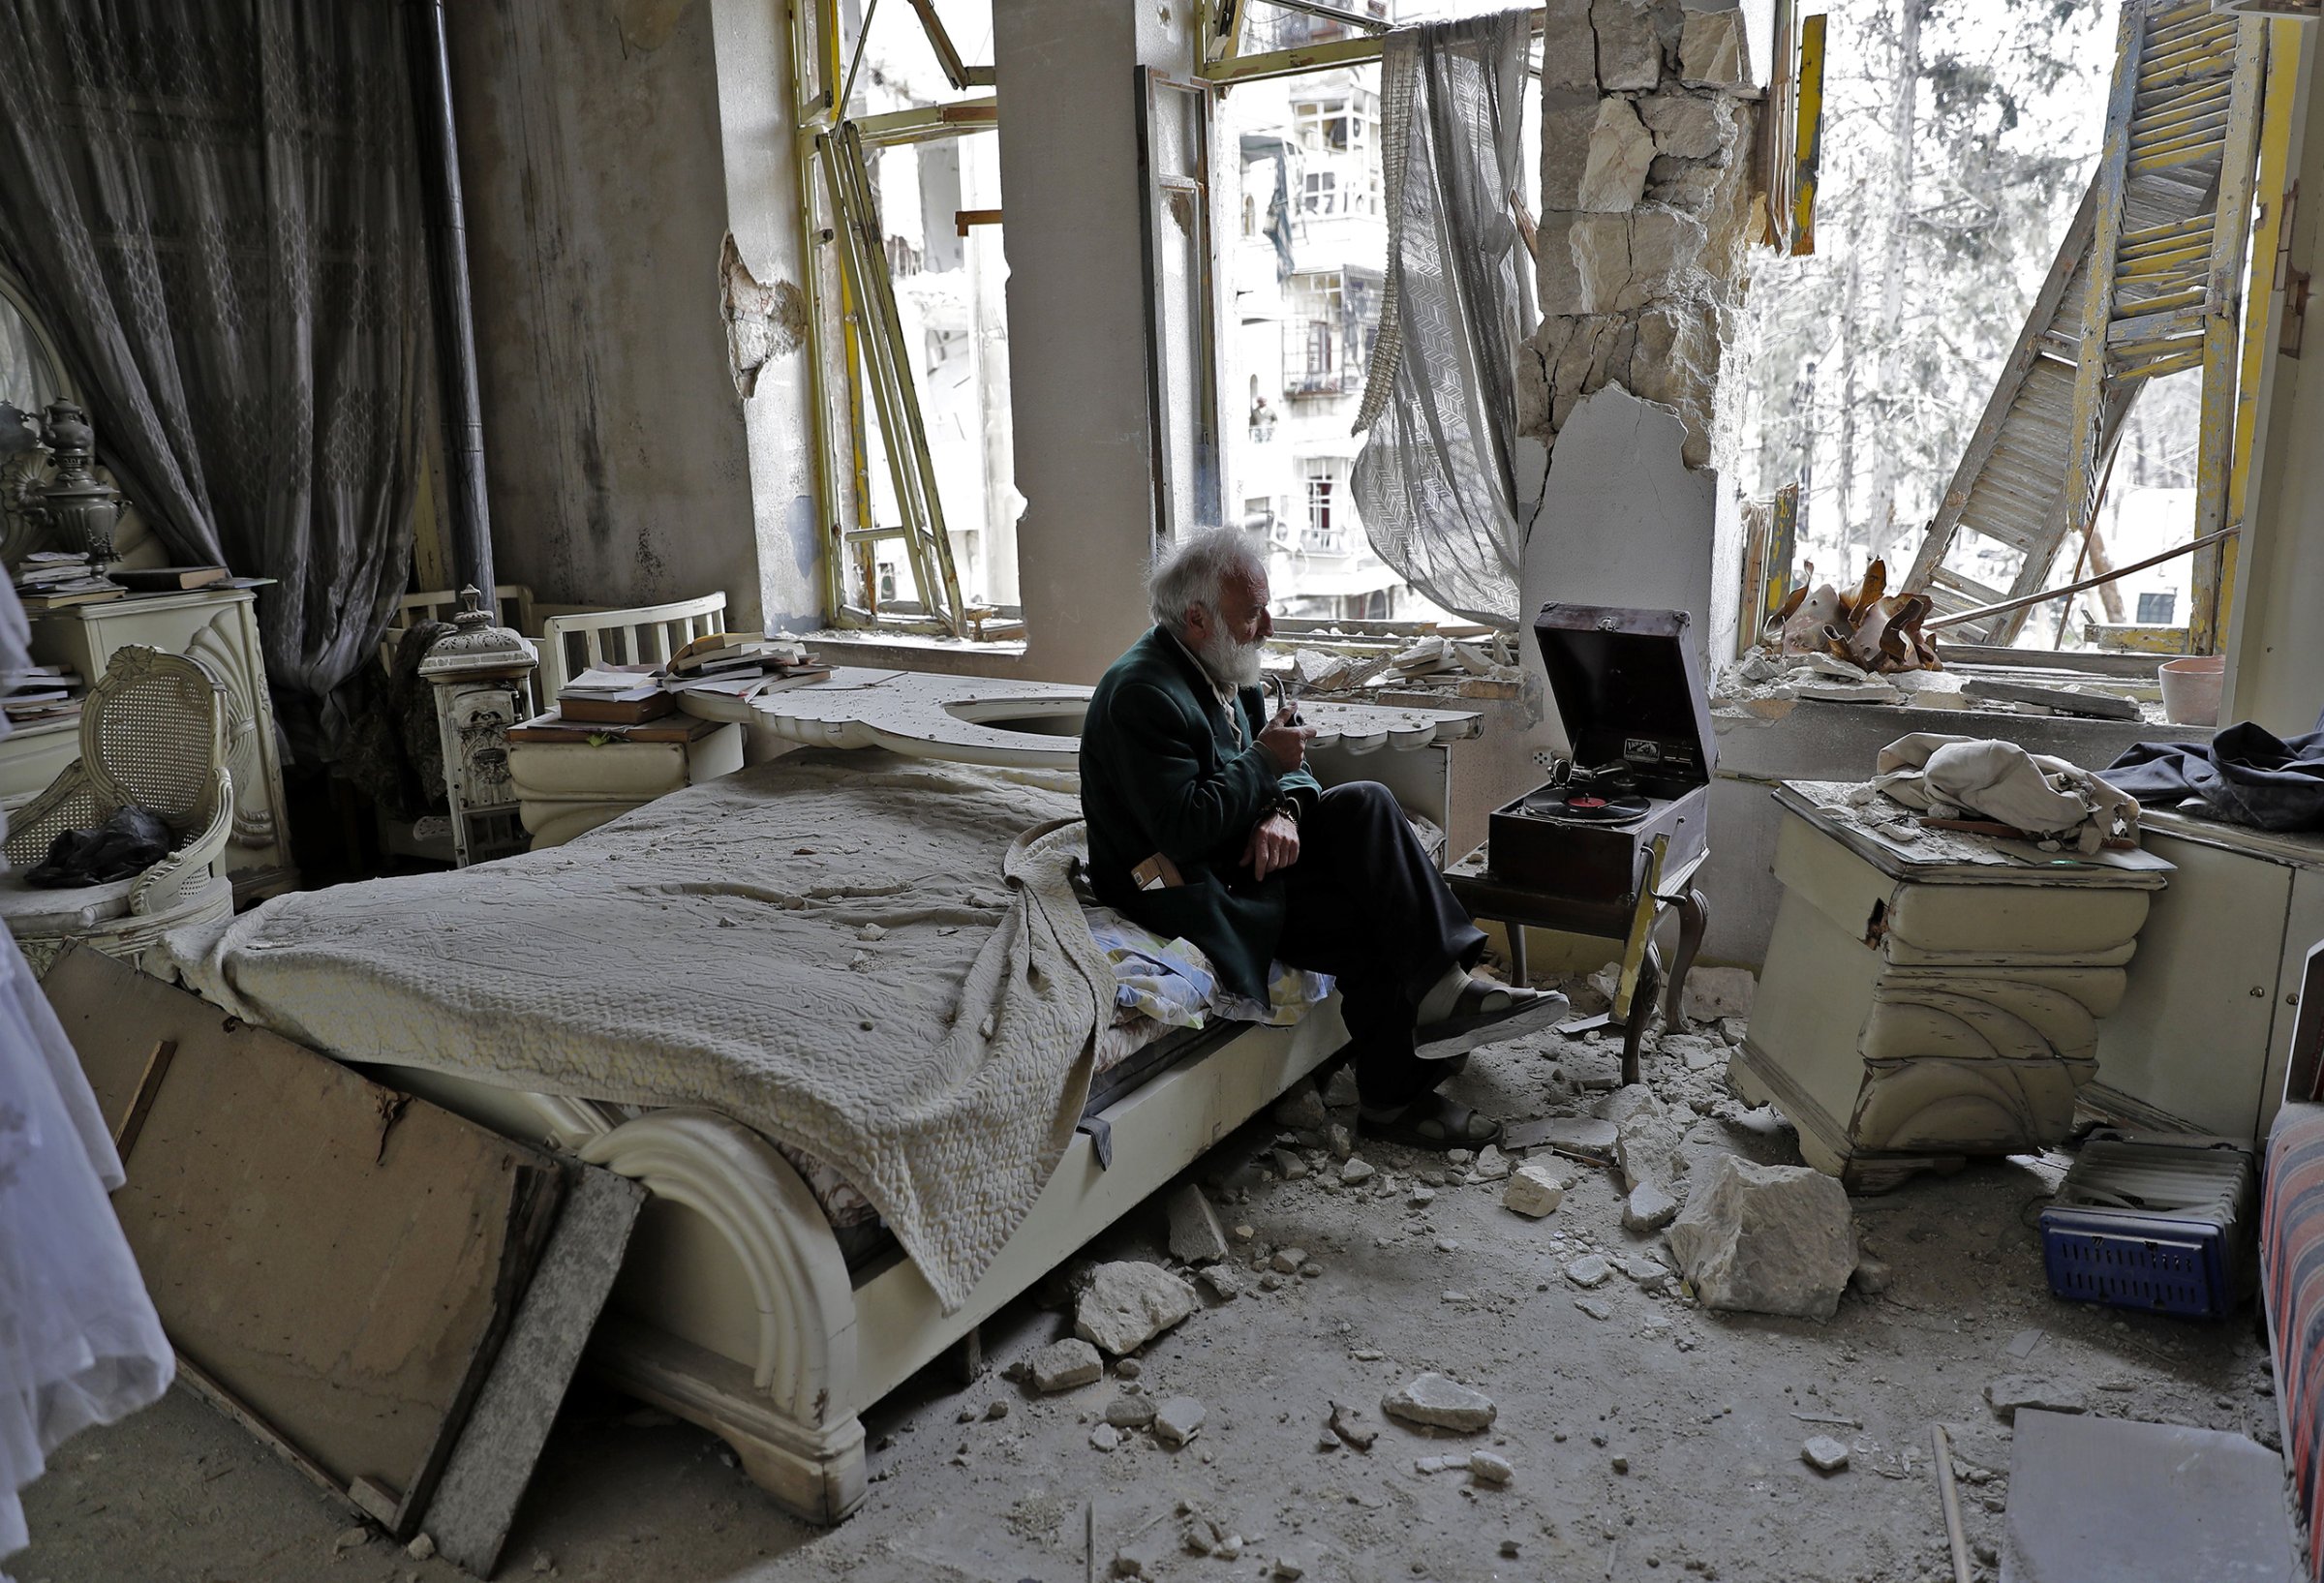 A man smokes his pipe as he sits in his destroyed bedroom, listening to music, in Aleppo's formerly rebel-held neighborhood of al-Shaar on March 9, 2017.